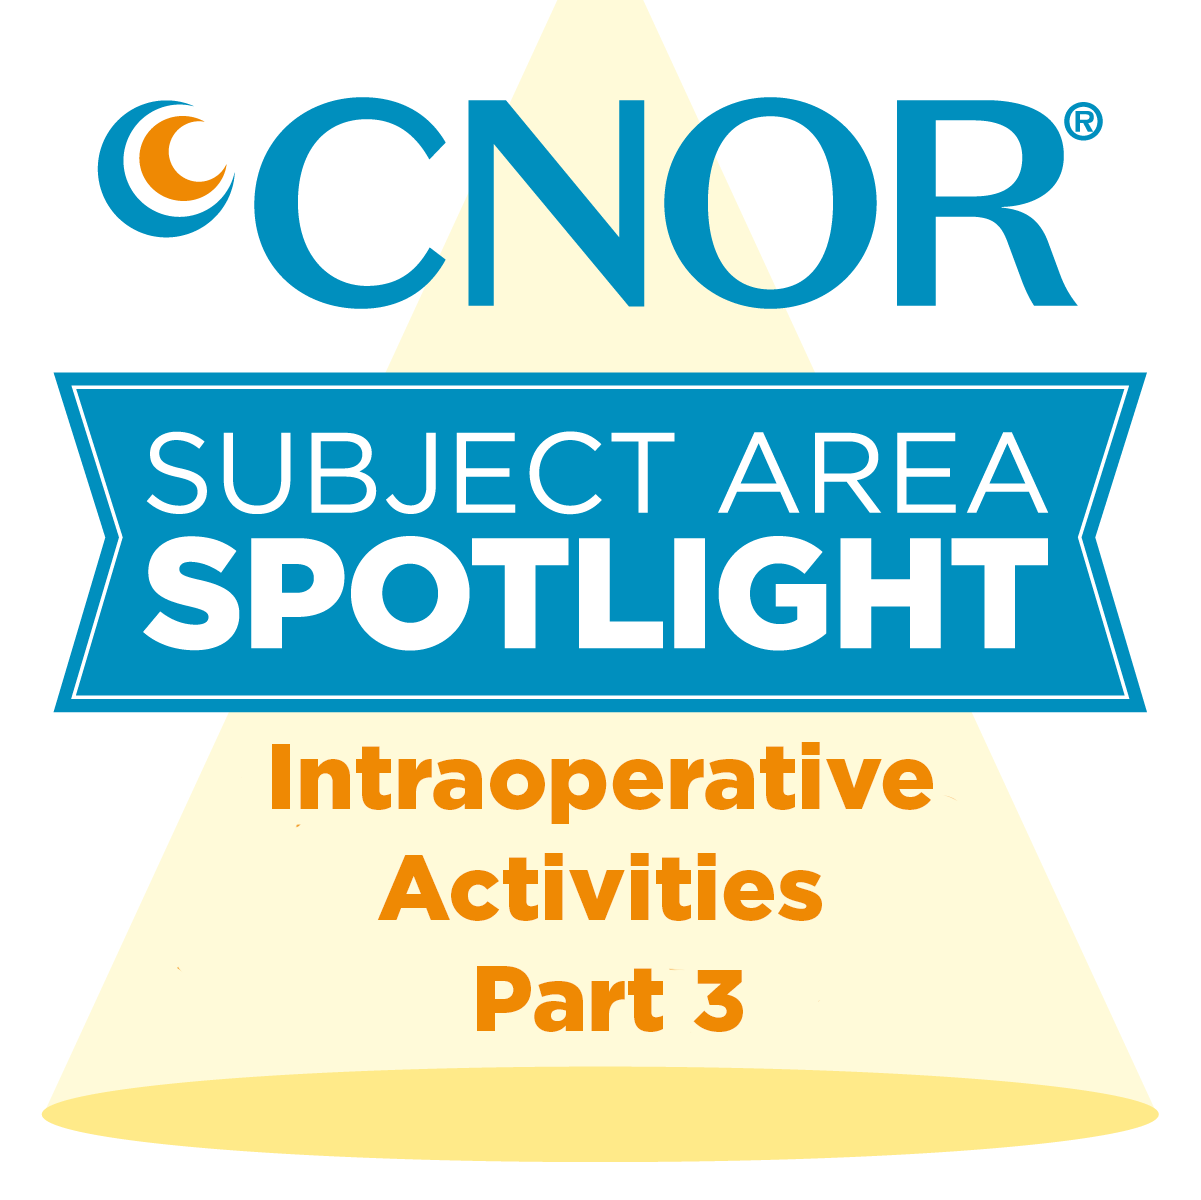 CNOR Subject Area Spotlight: Management of Intraoperative Activities Patient Care and Safety Part 3